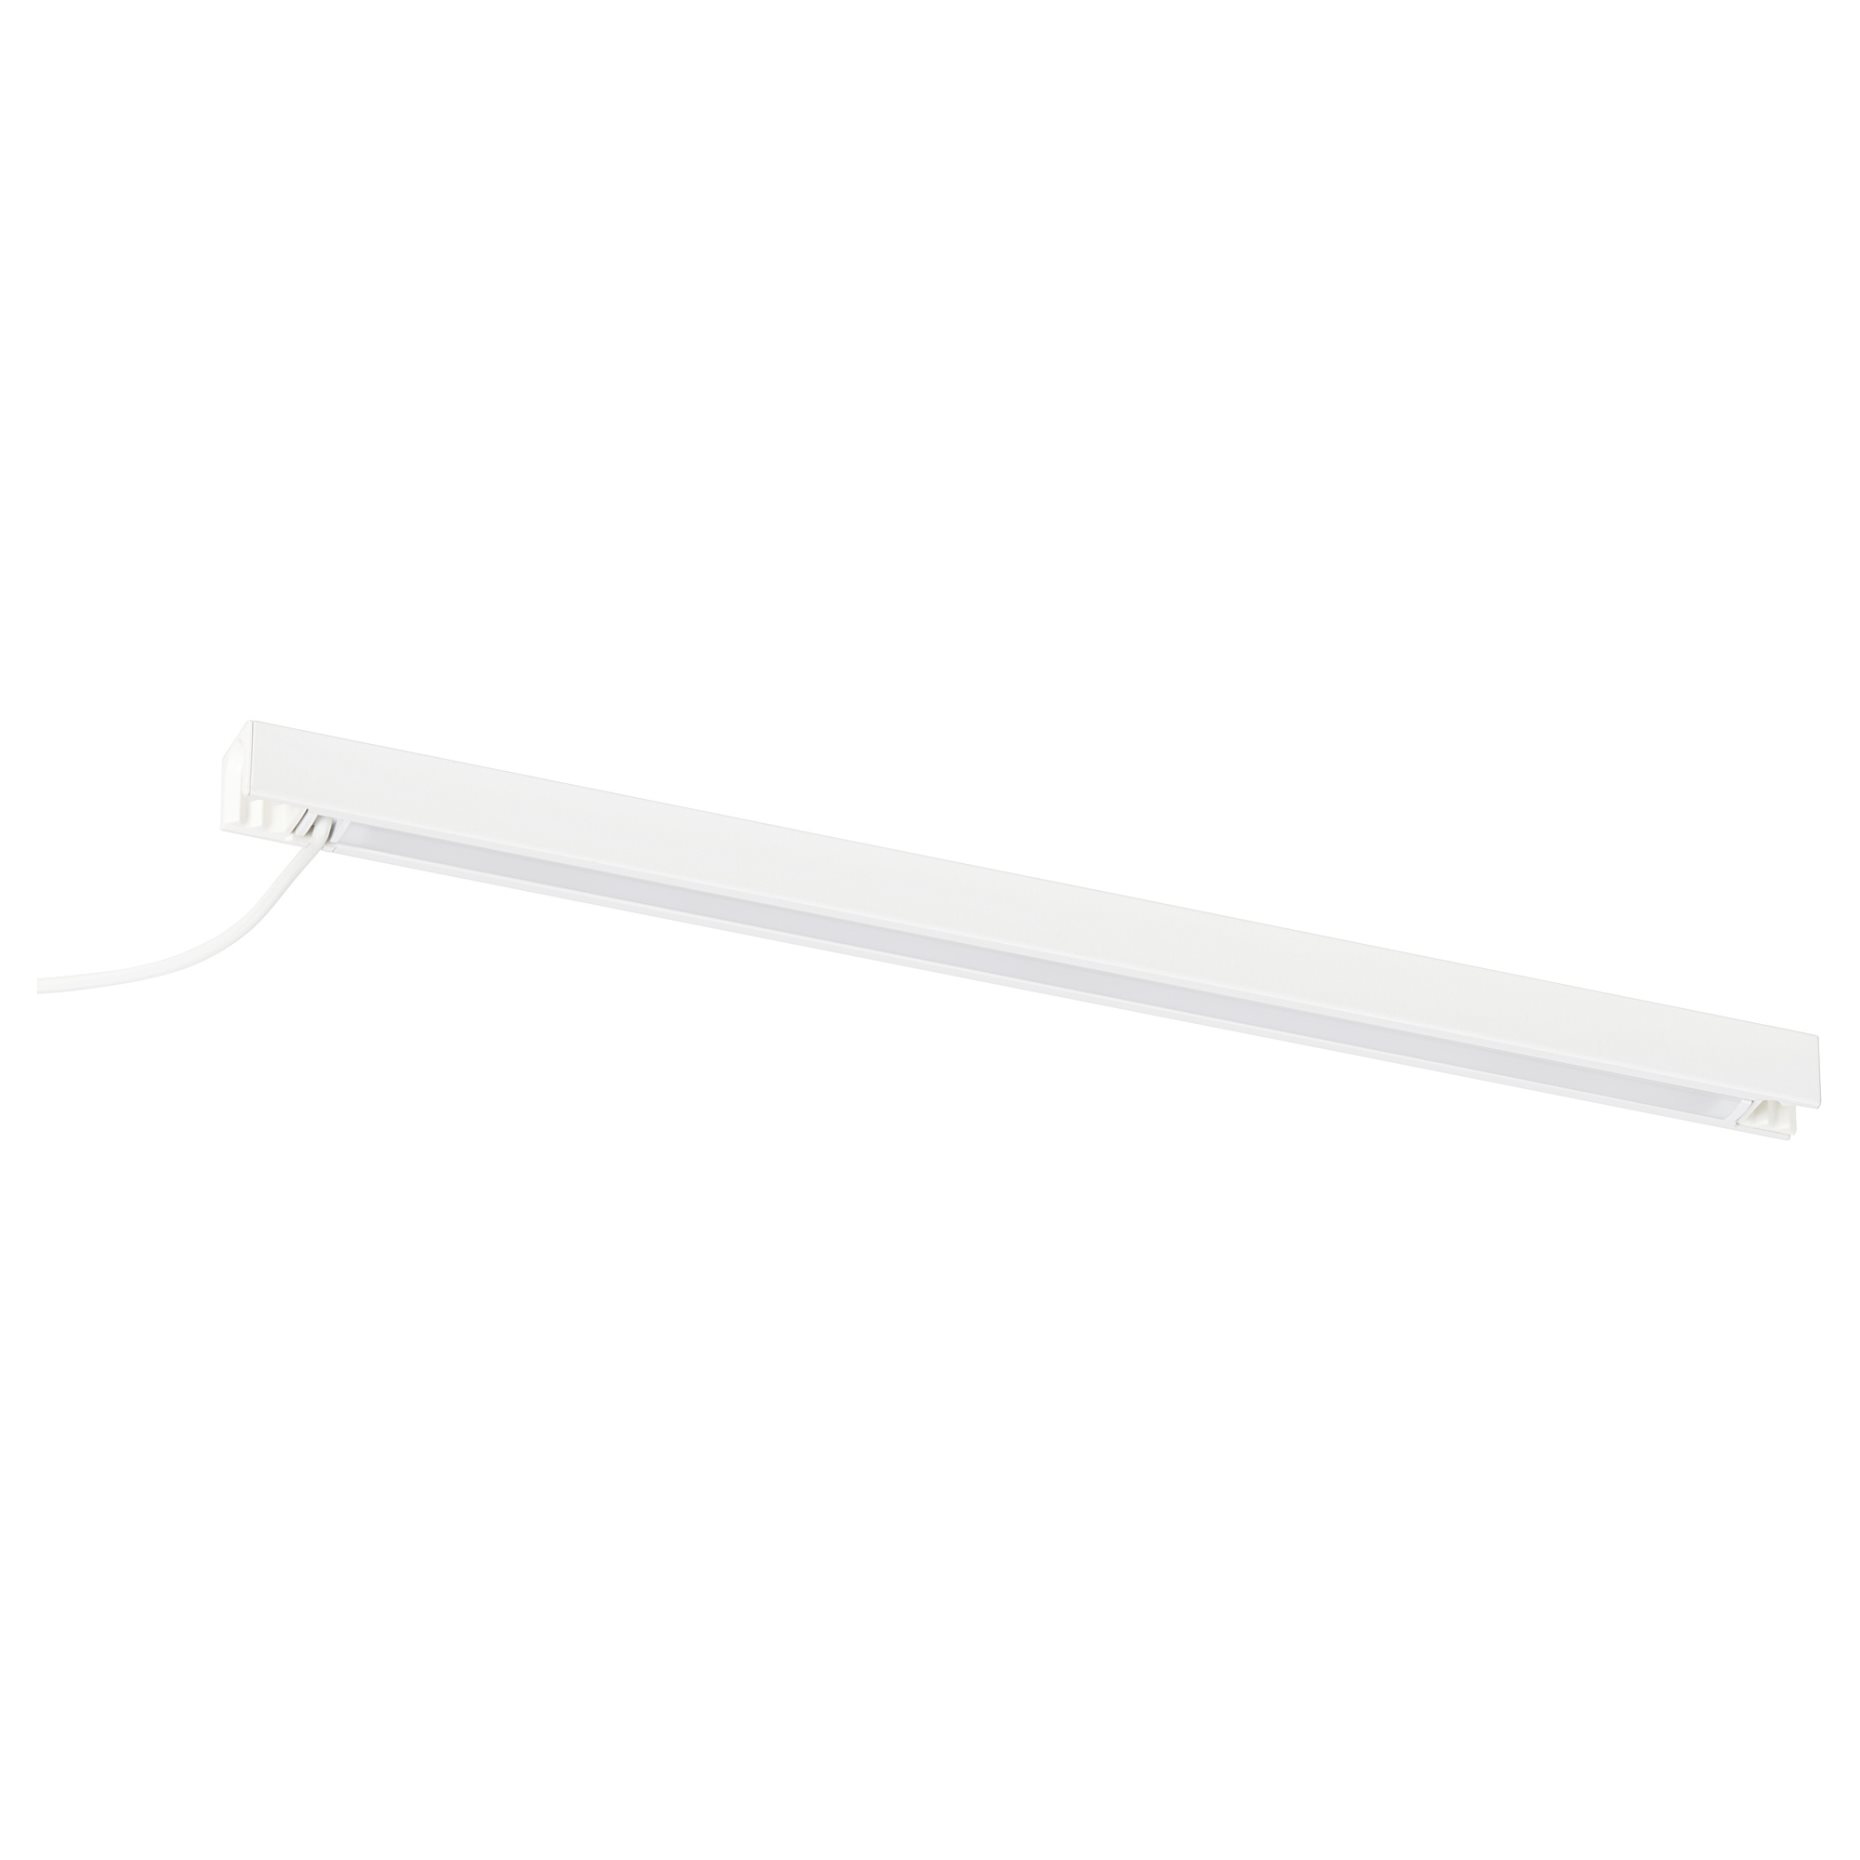 SILVERGLANS, bathroom lighting strip with built-in LED light source/dimmable, 40 cm, 705.286.68